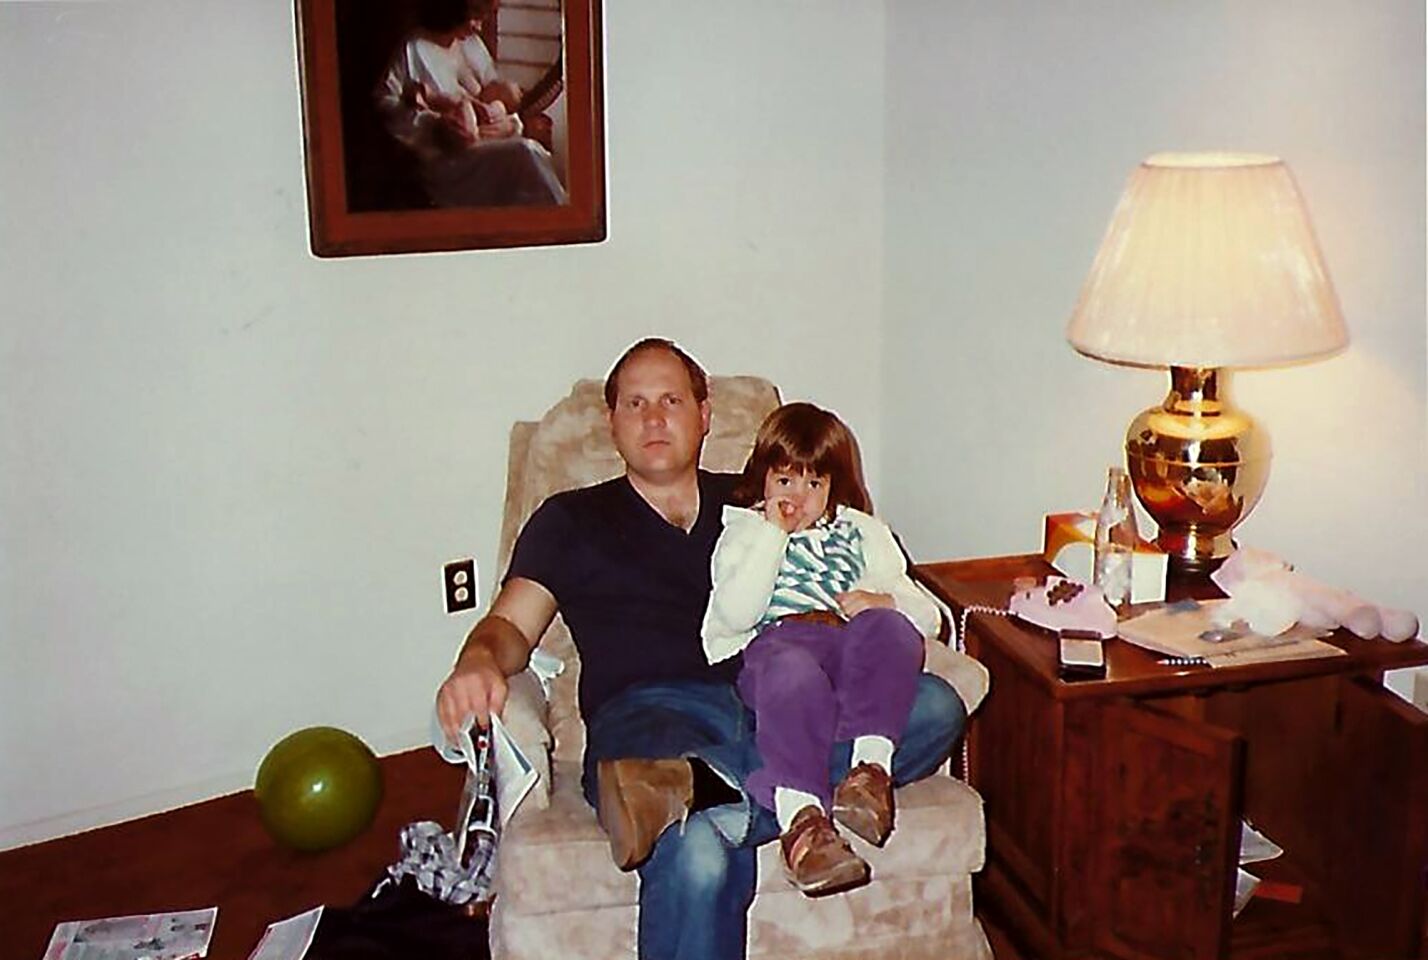 Joseph James DeAngelo with a niece at home in April 1983